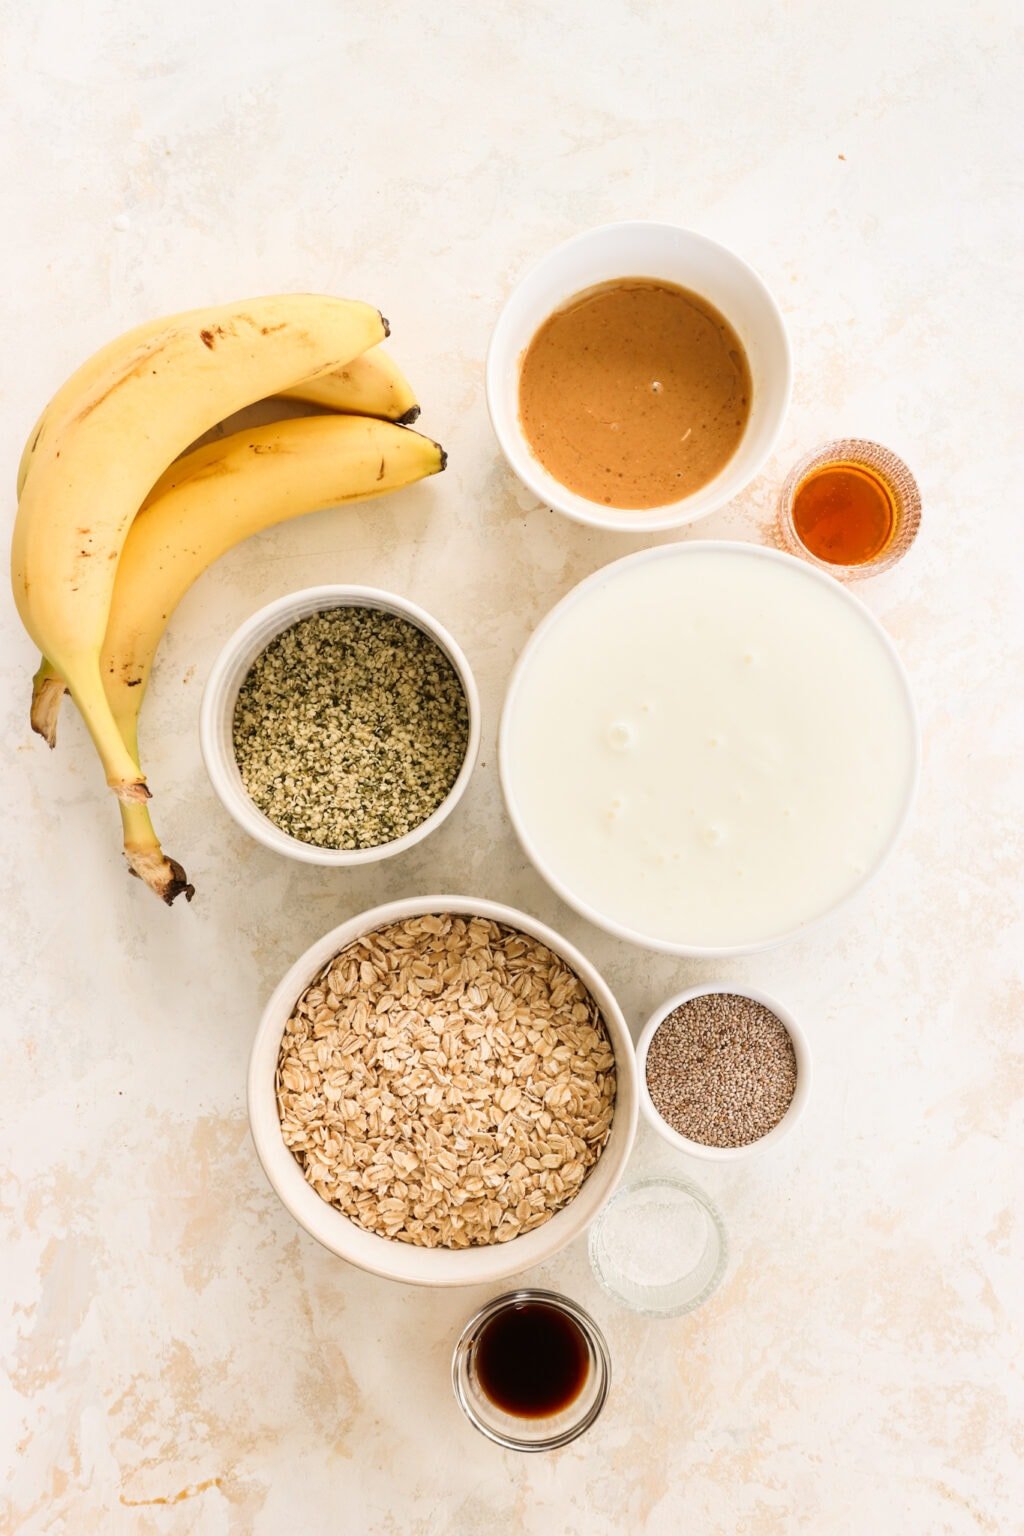 Ingredients for Peanut Butter & Banana Kefir Overnight Oats in glass bowls, including quick oats, hemp hearts, chia seeds, vanilla extract, plain kefir, maple syrup, peanut butter, and bananas